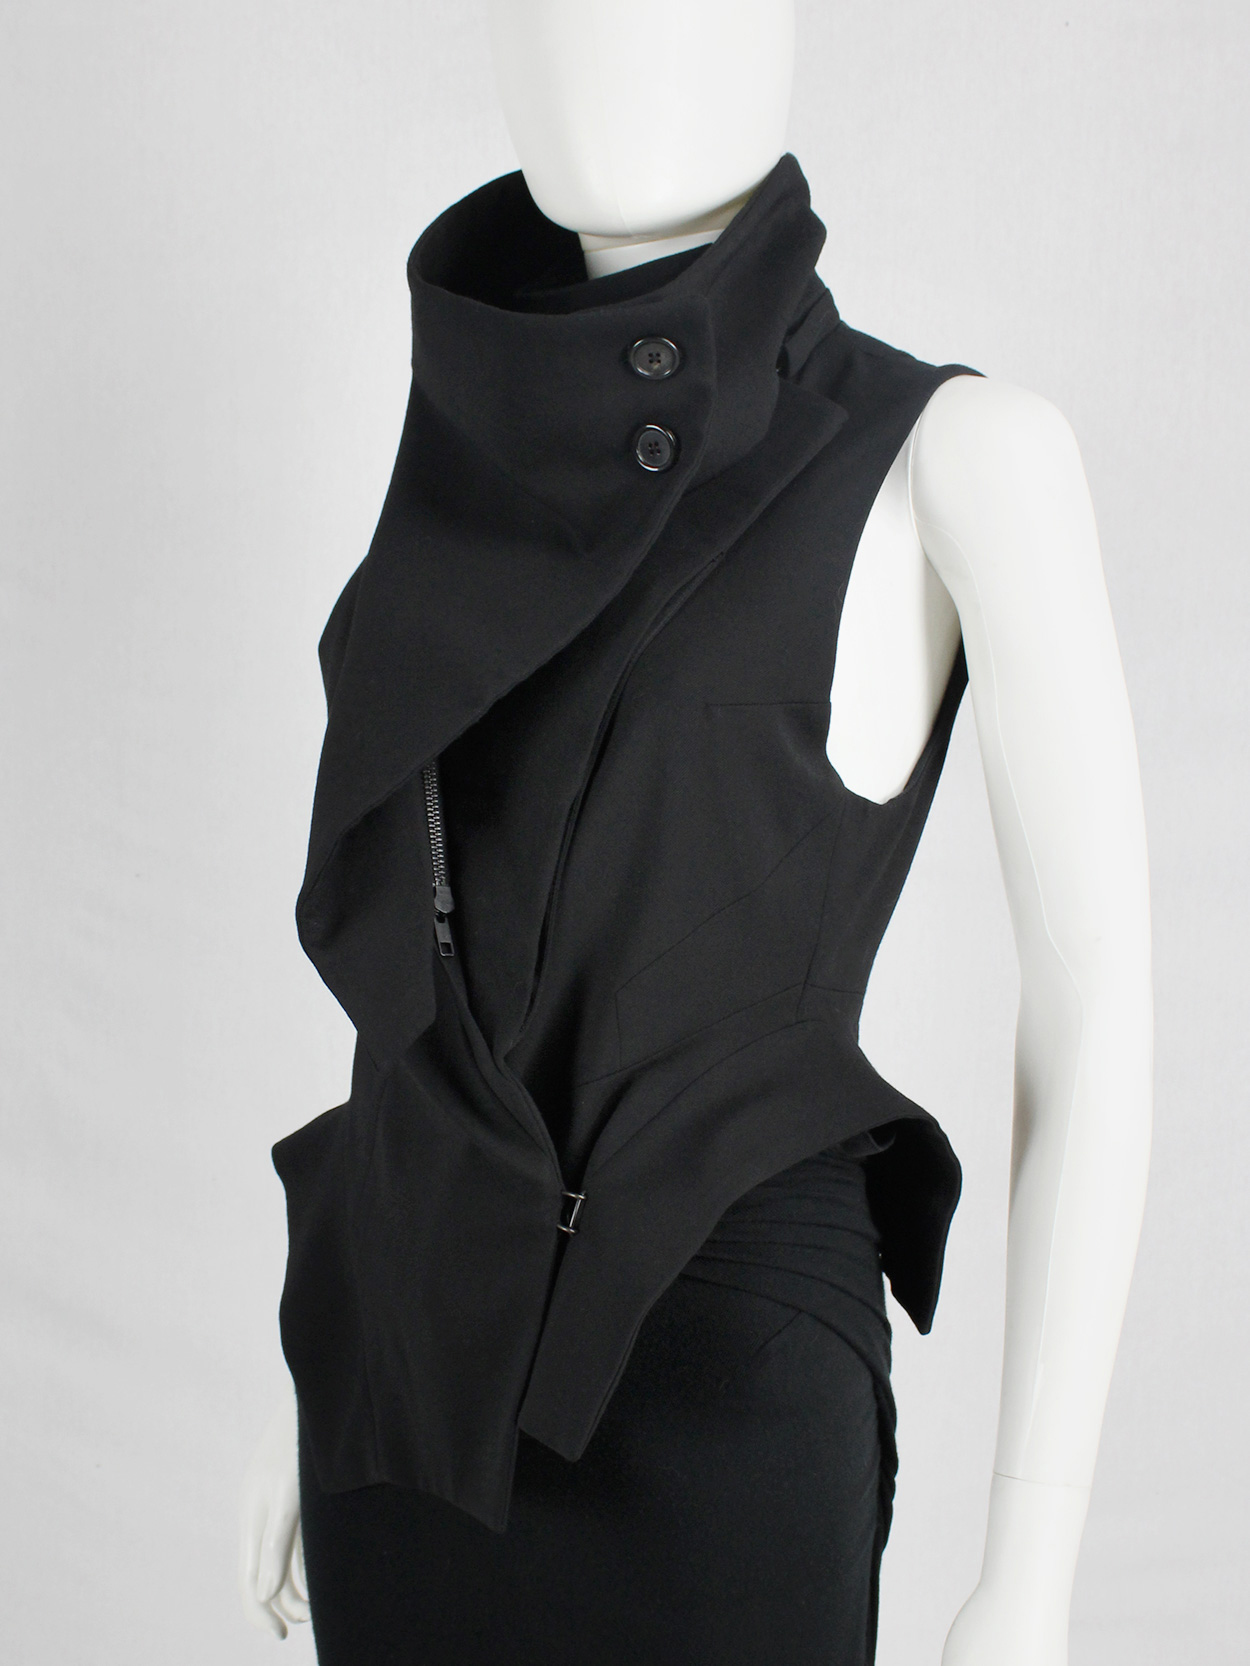 Ann Demeulemeester black draped vest with standing collar and zipper ...